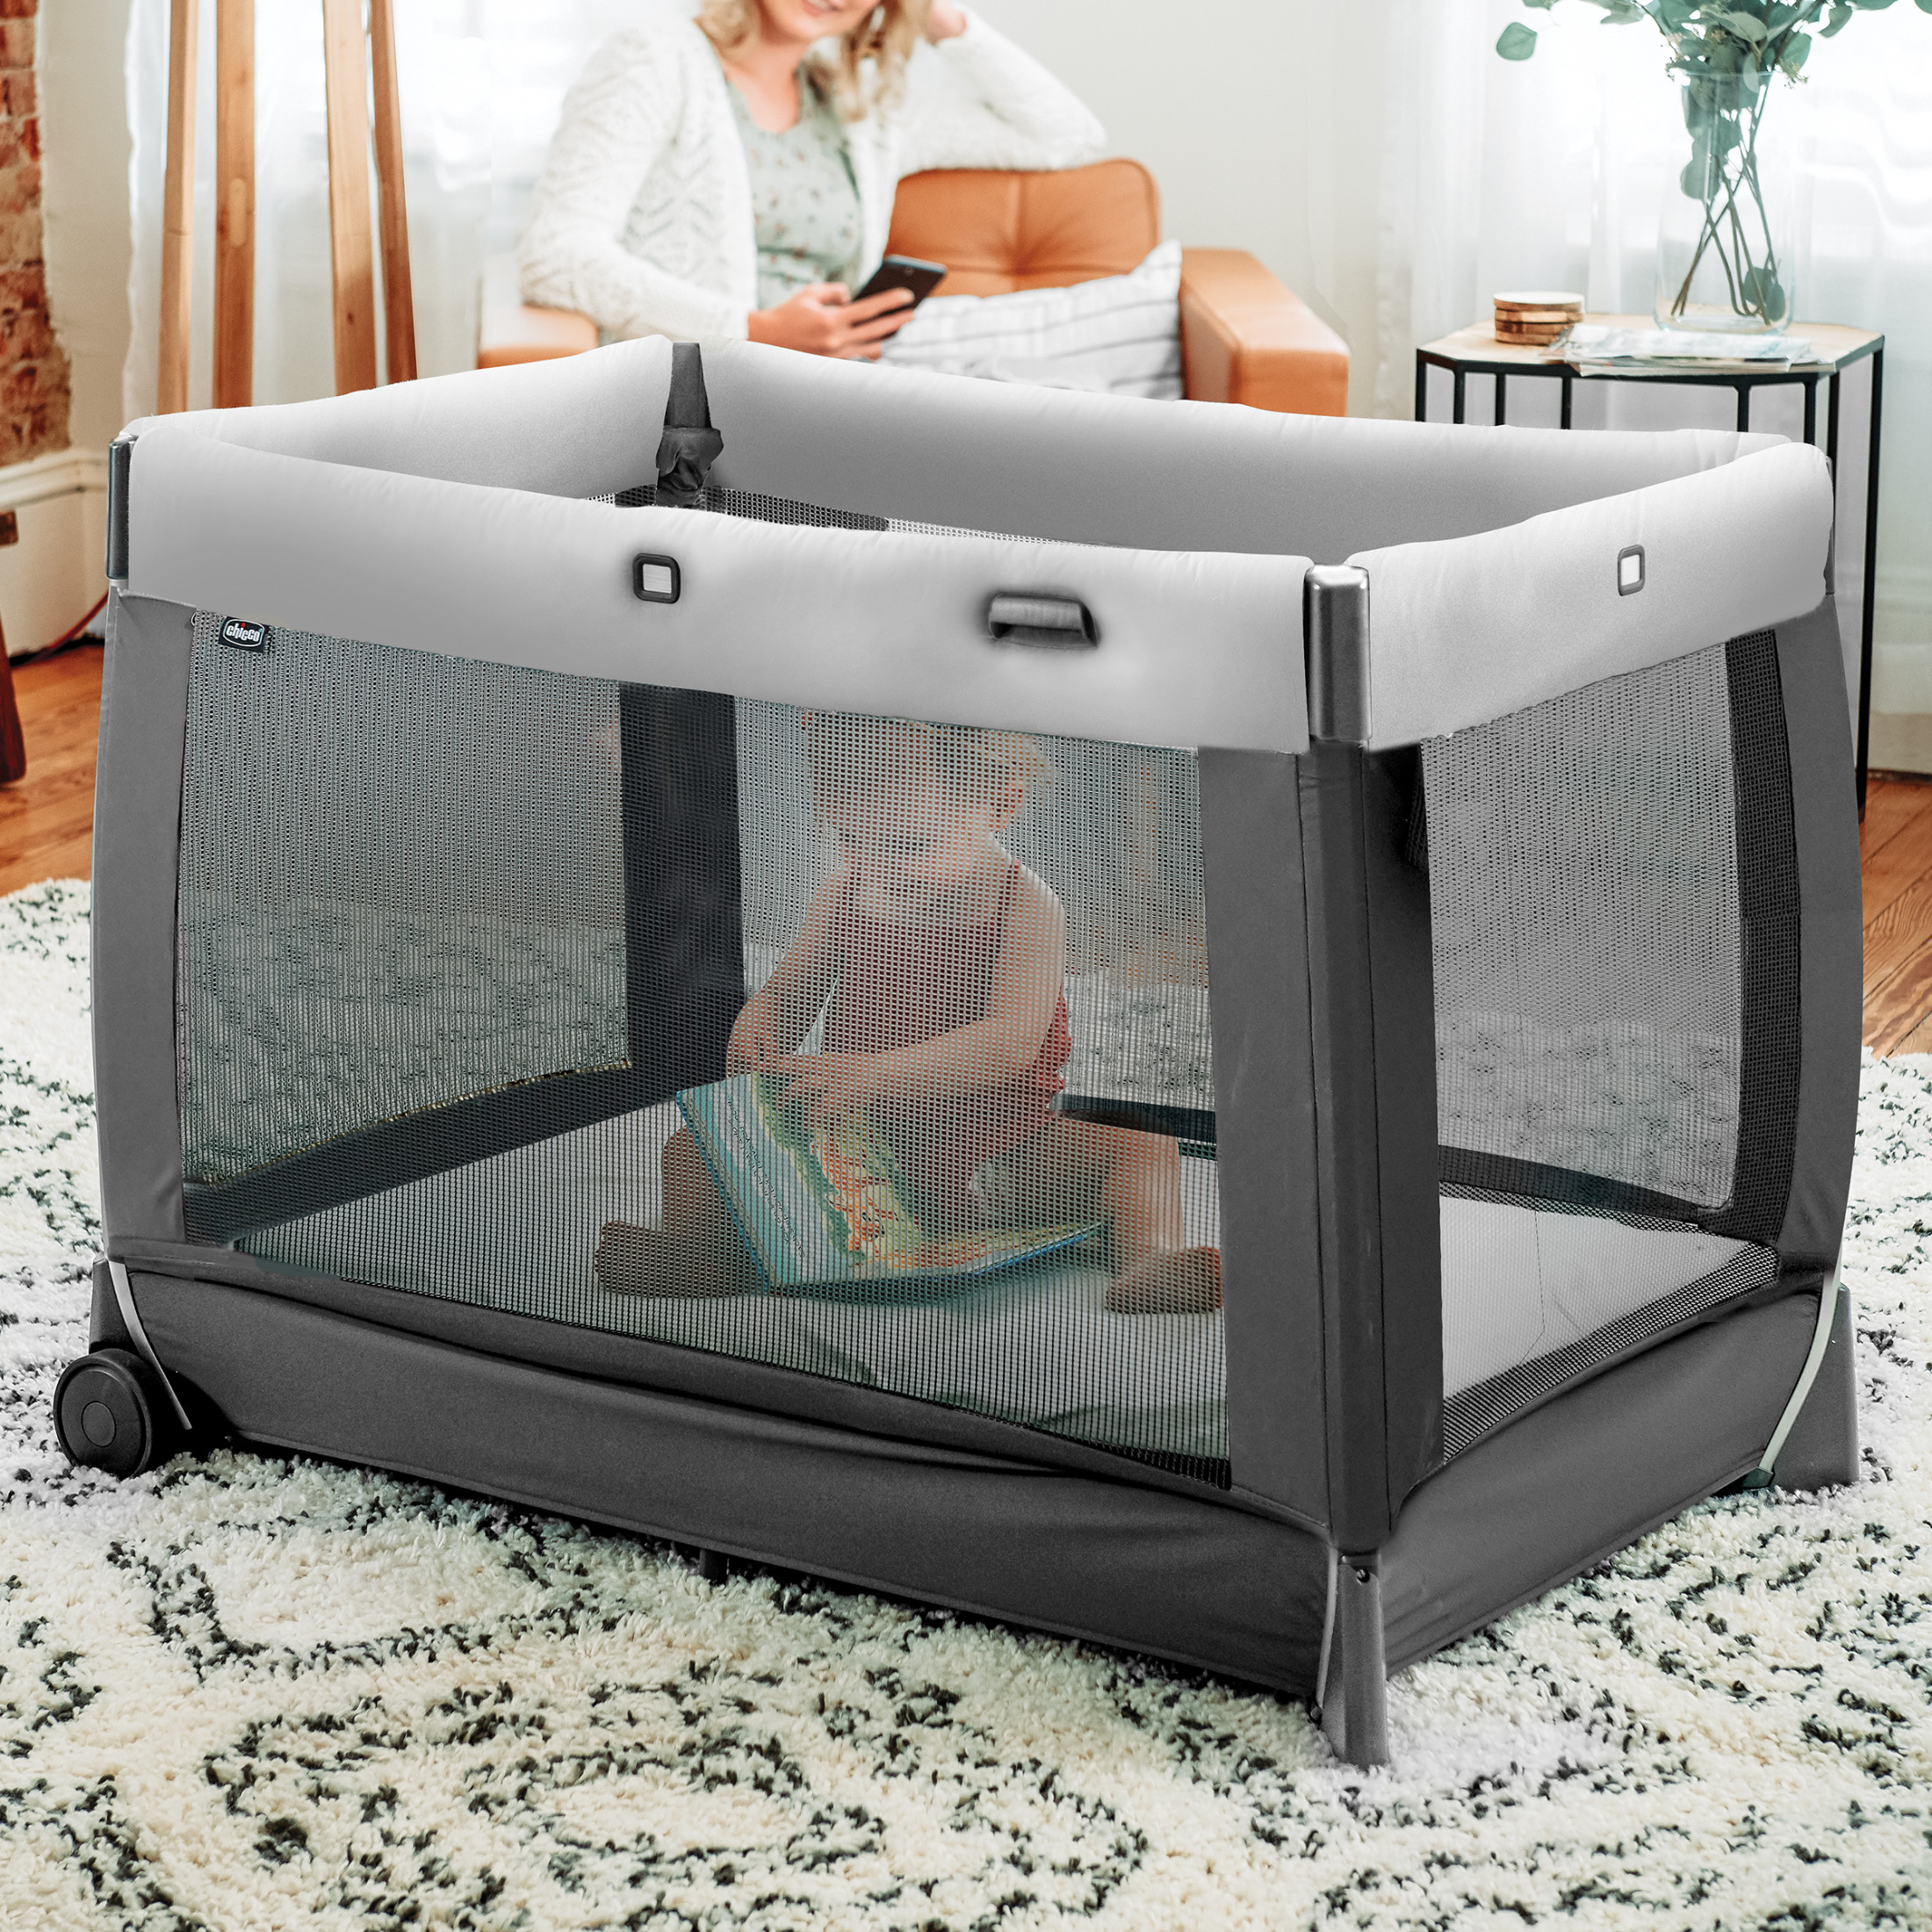 Chicco Lullaby All-in-One Portable Playard with Bassinet and Snap-on Changer - Camden (Black) - image 4 of 10